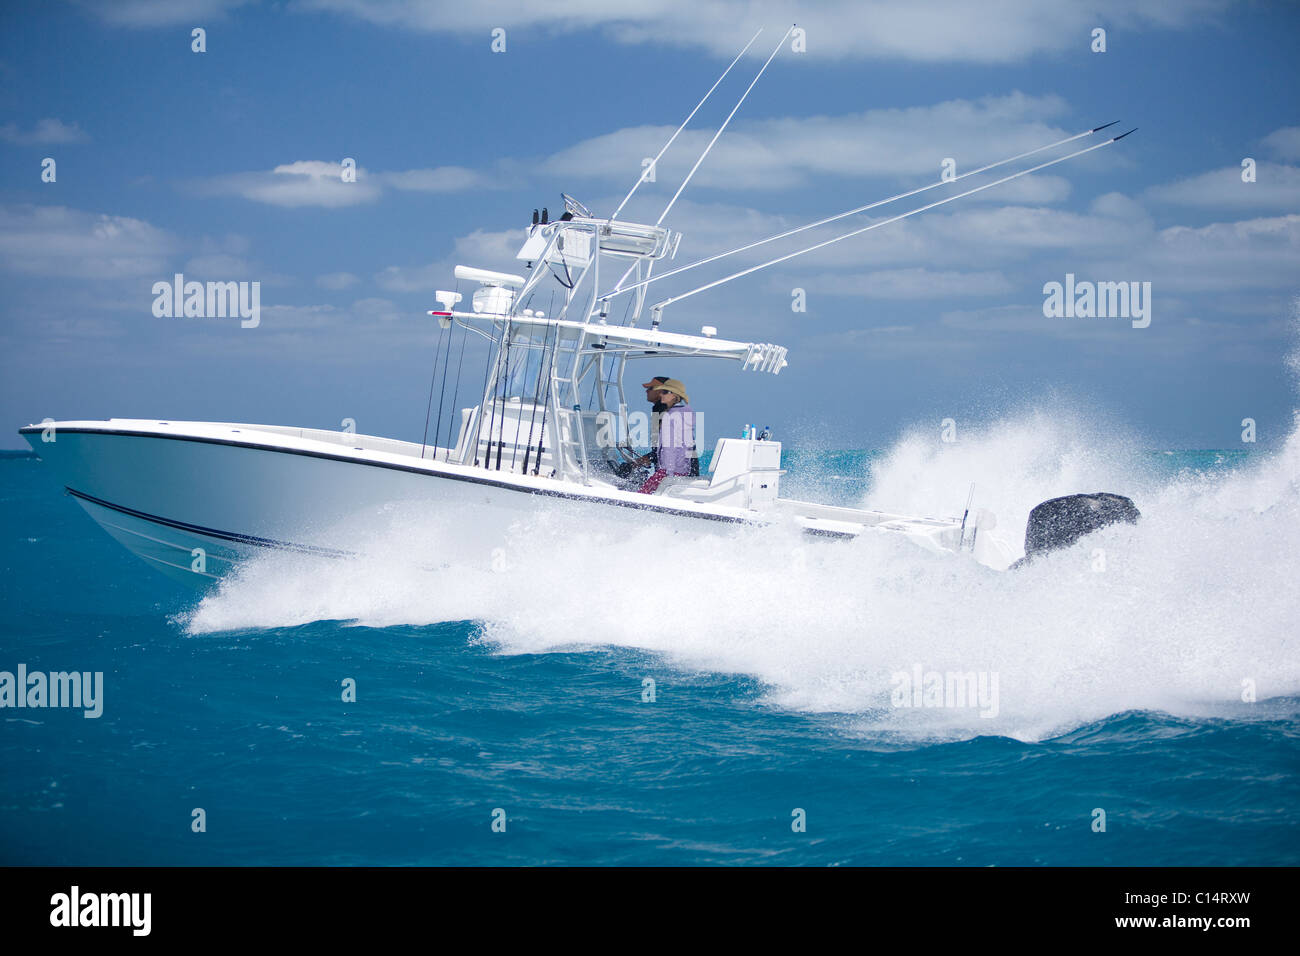 A fishing boat speeds through the blue surf spraying white water. Stock Photo